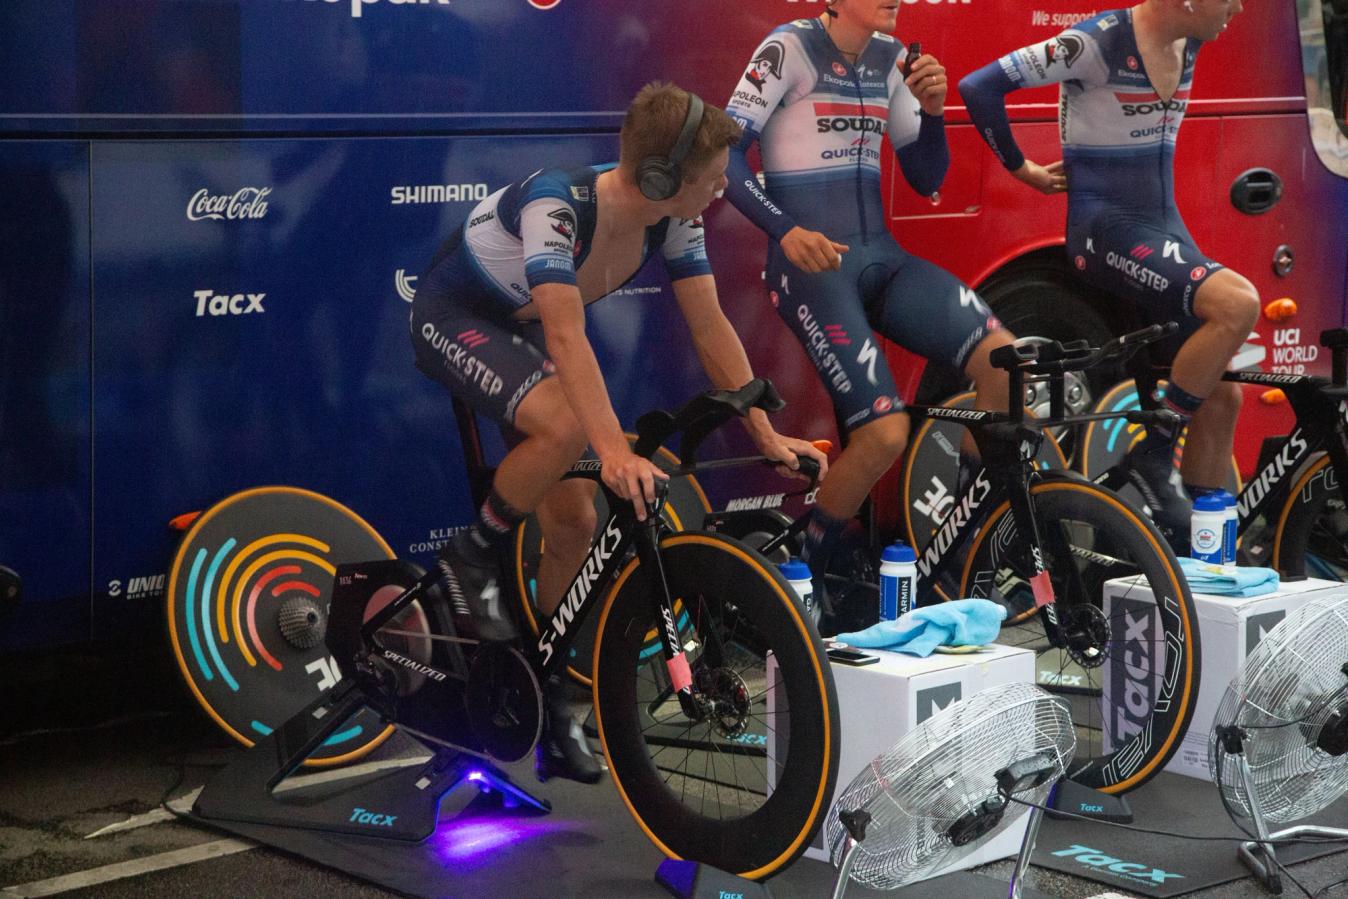 Remco Evenepoel warms up for stage 1 of the Vuelta a Espana